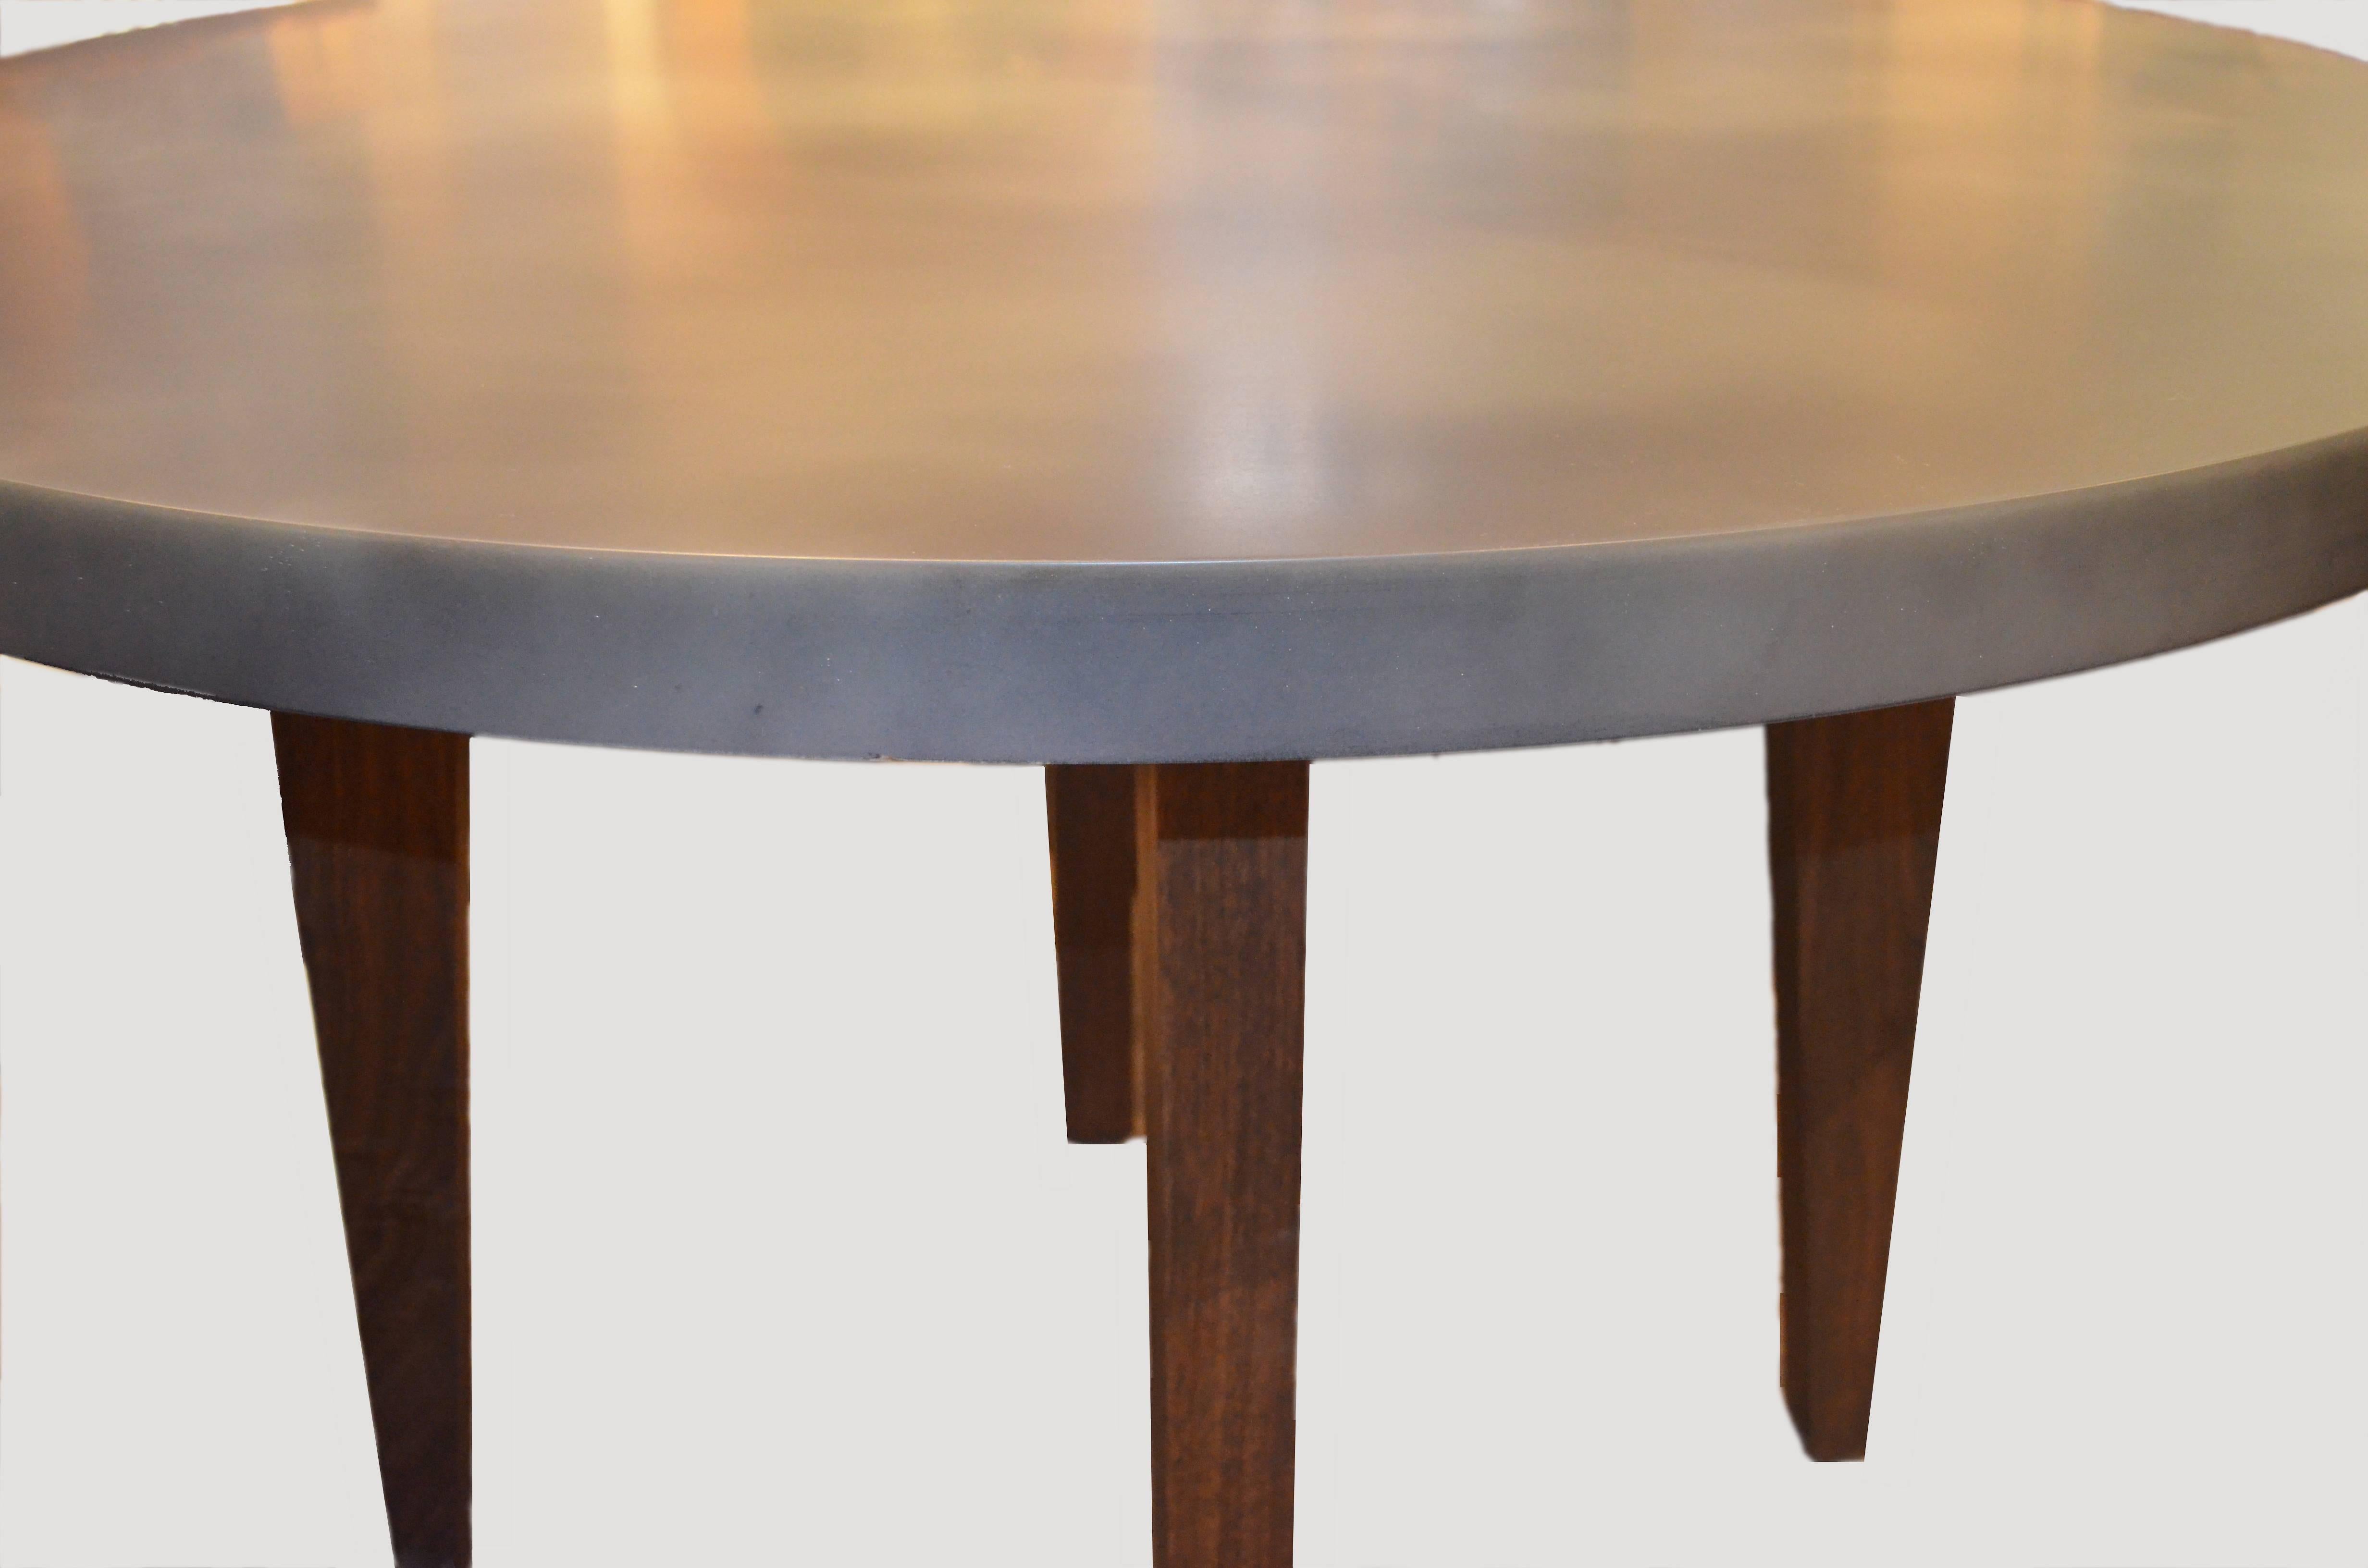 American Andrianna Shamaris Black Walnut Wood Table and Resin Coated Top For Sale